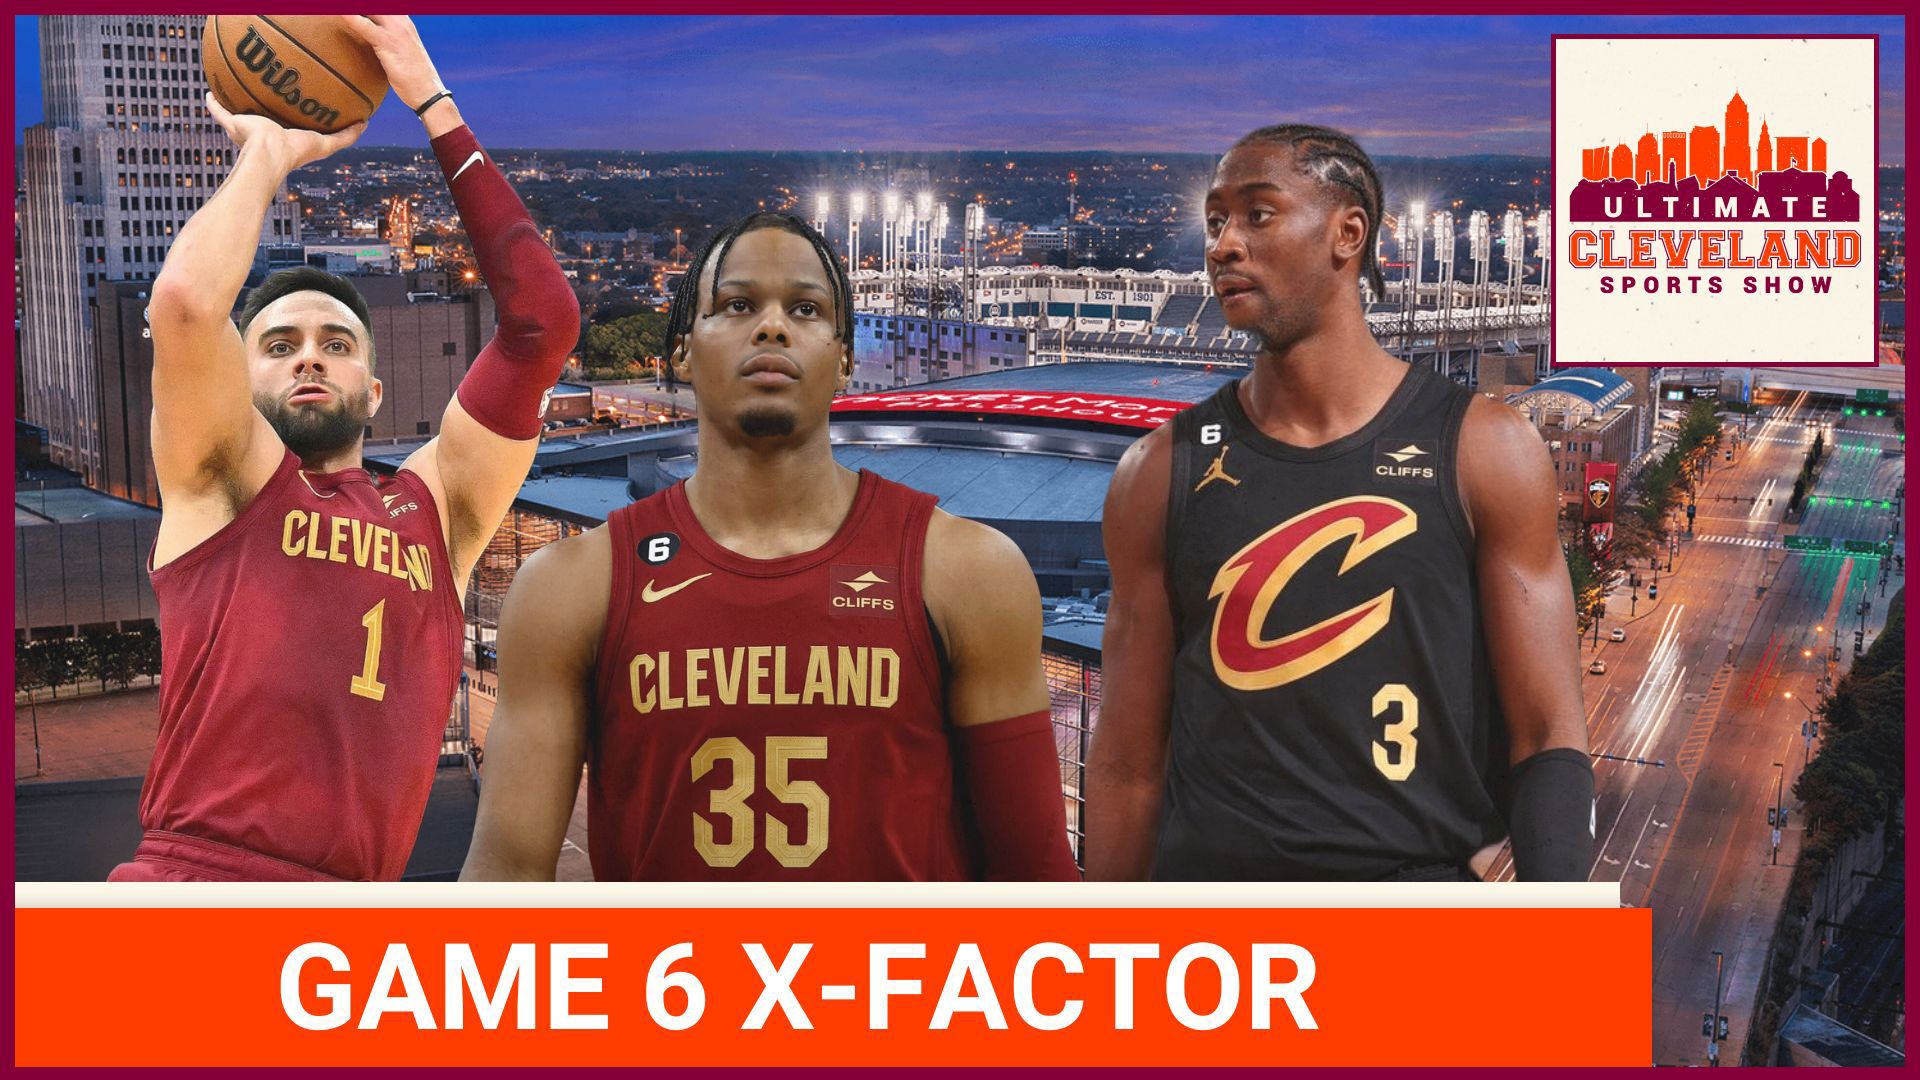 Cleveland Cavaliers have a chance to win their series tonight in Orlando. With consistent on the road issues, especially in the playoffs, do we think they have what